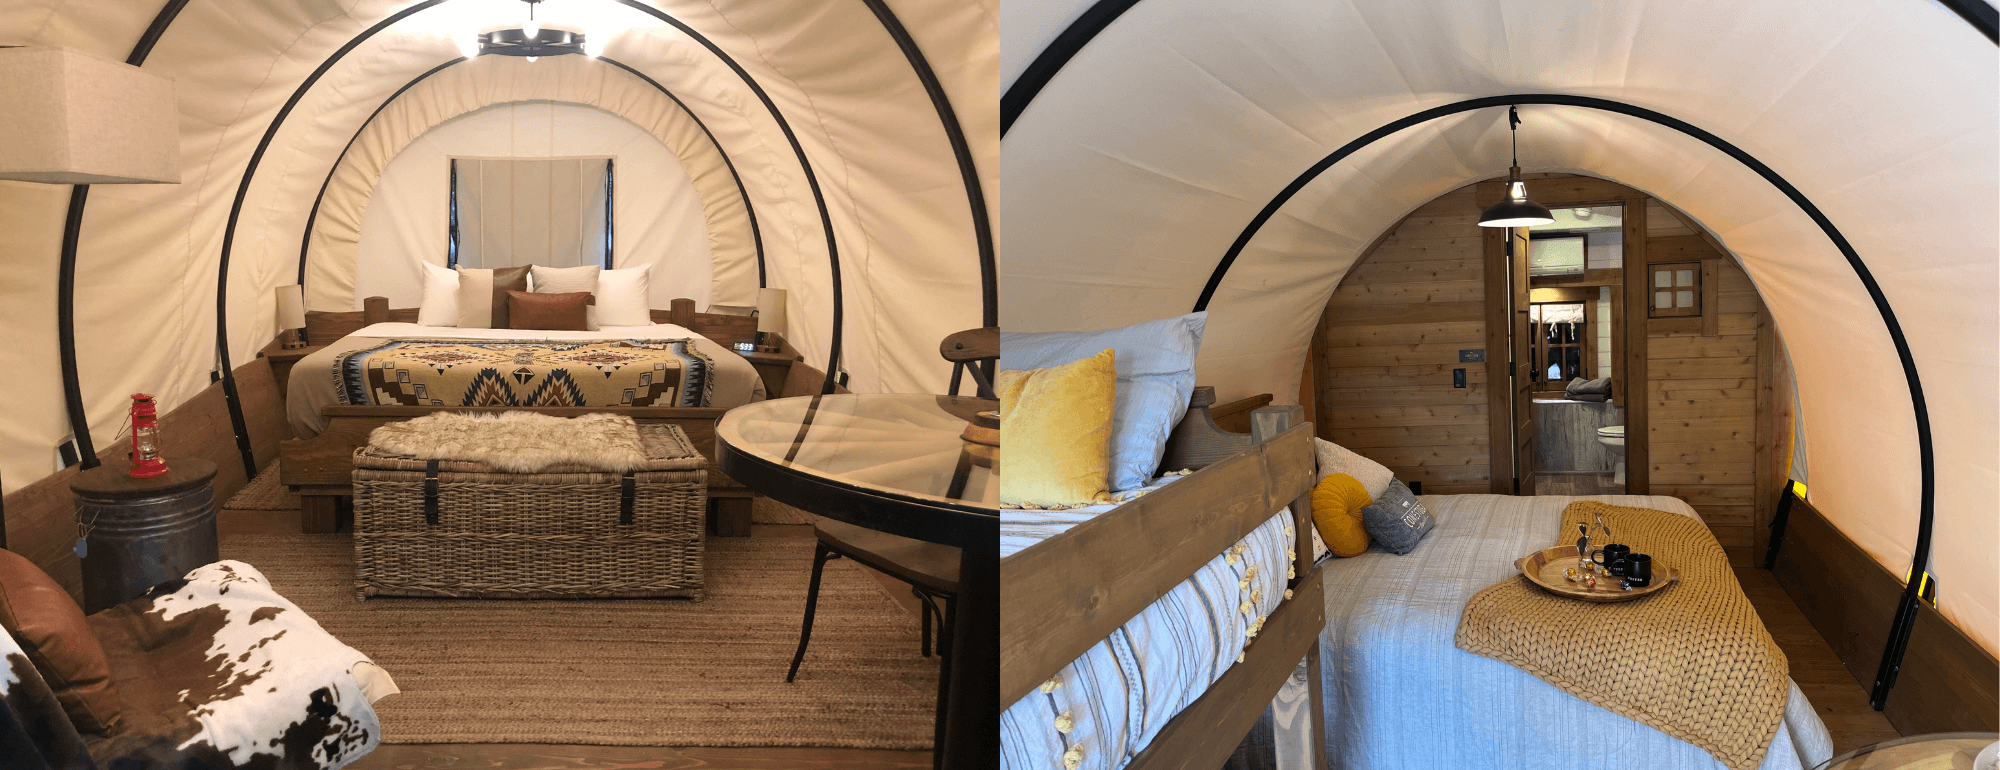 Inside photos of the luxury camping wagon